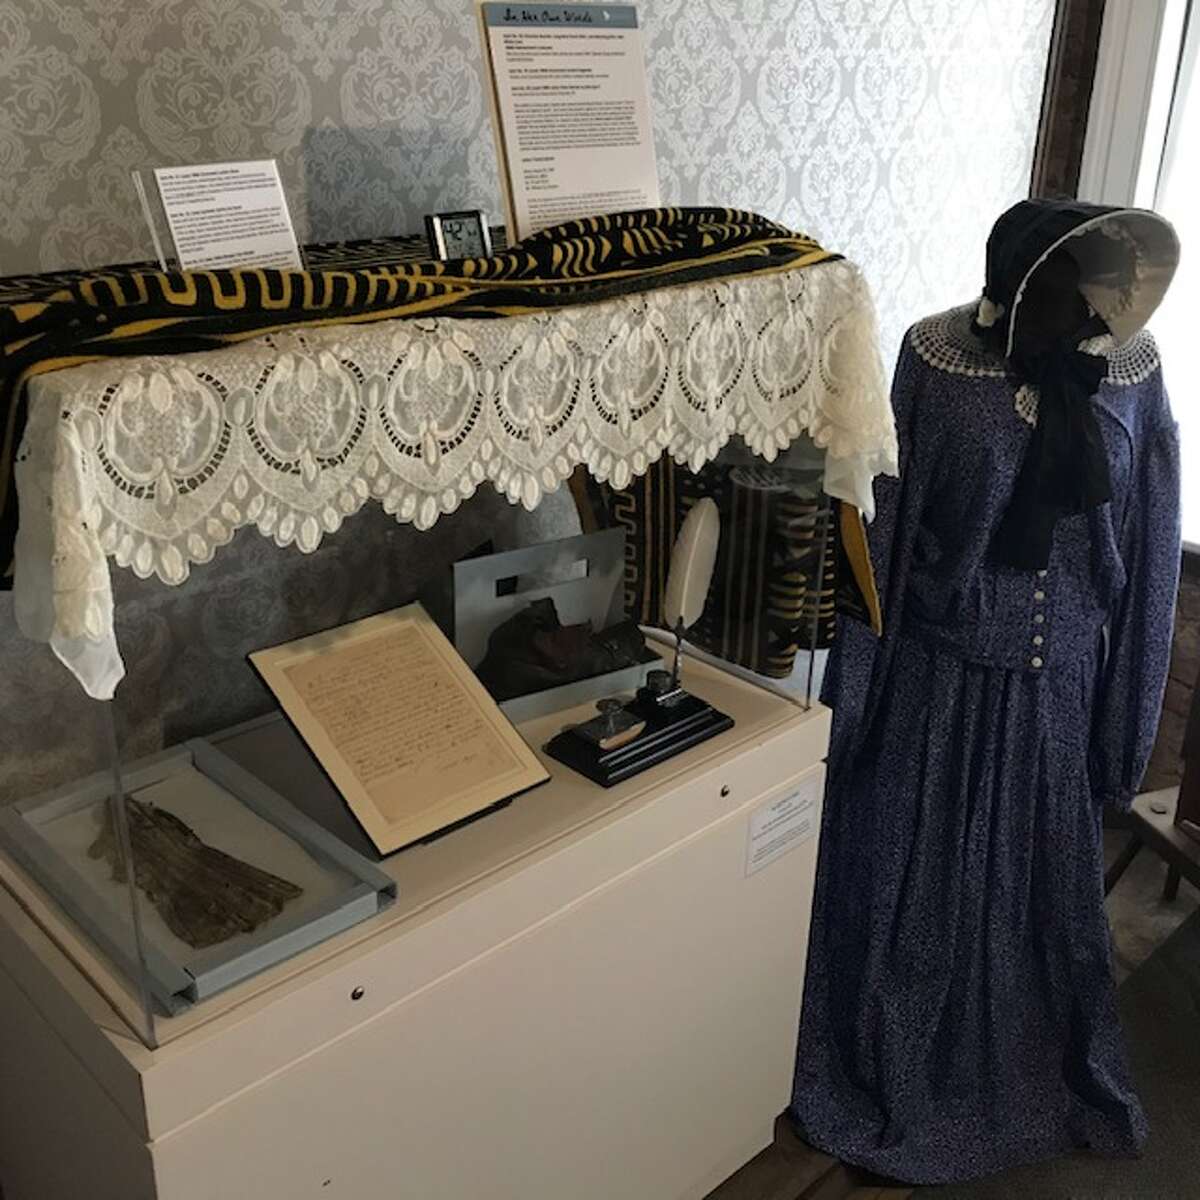 A new exhibit that details the pivotal role Harriet Myers played on the Underground Railroad is on display at the Myers’ residence in Albany and tours are available through an online reservation.